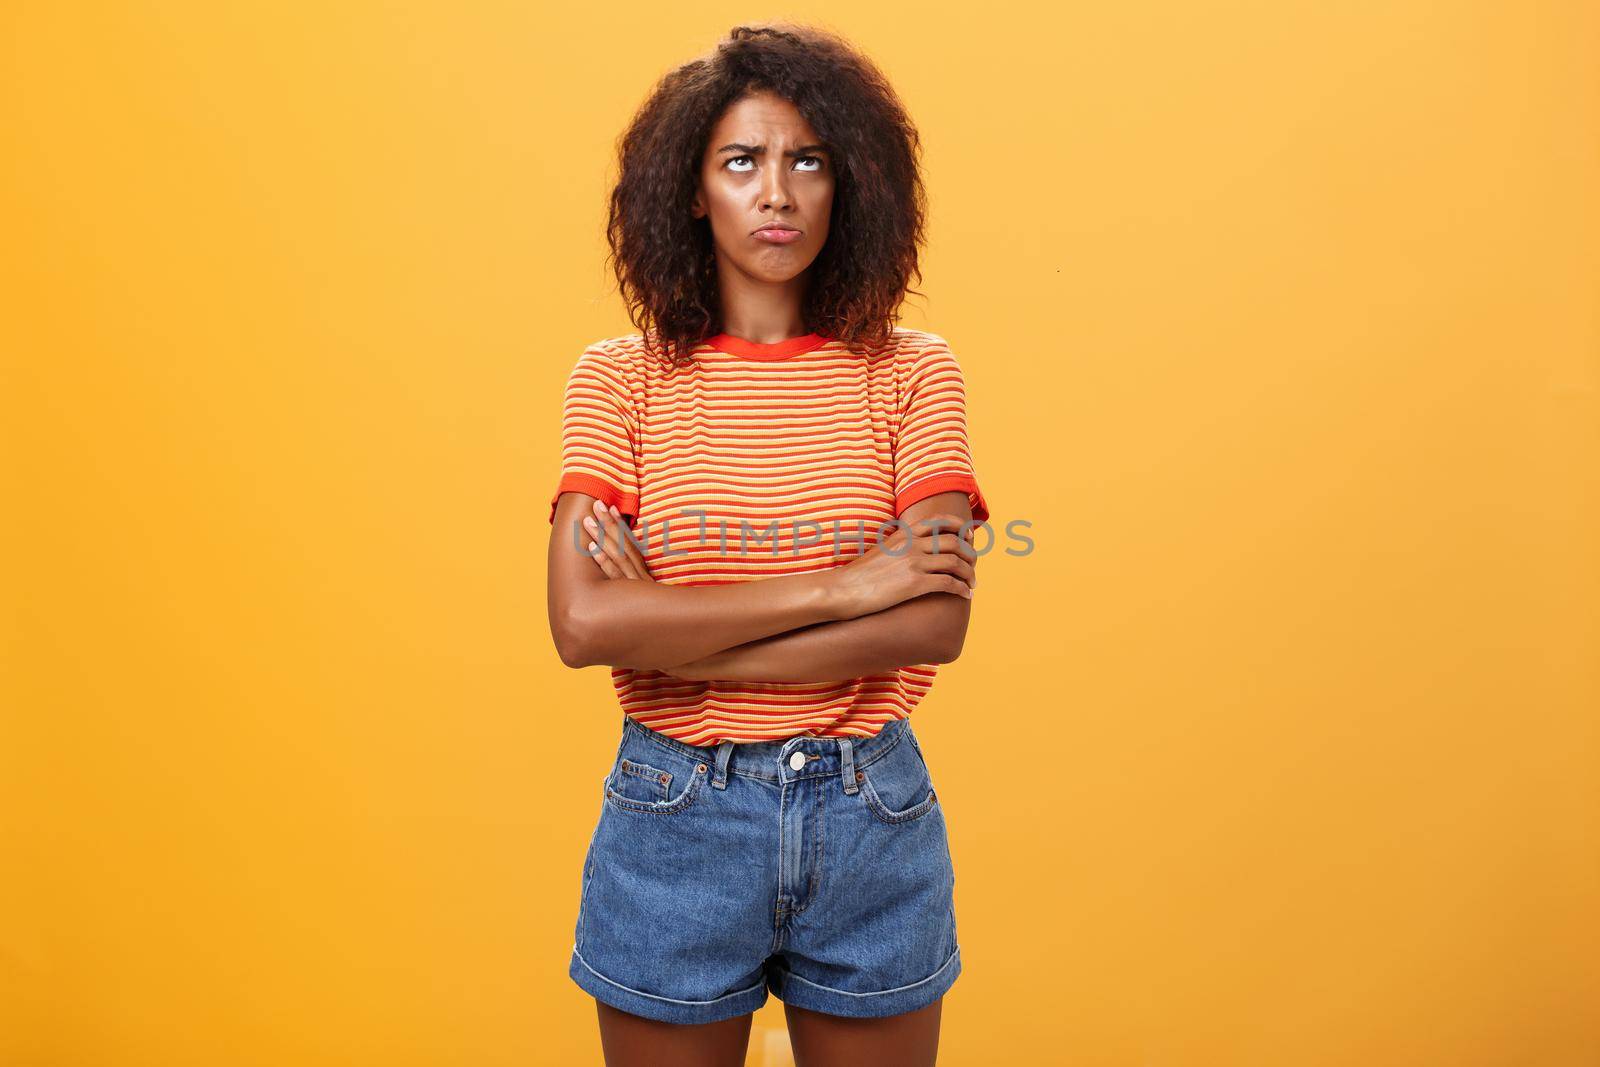 Why life so unfair. Portrait of cute offended and gloomy displeased african american young woman with afro hairstyle sulking pouting crossing arms on chest looking up with envy or jealousy.